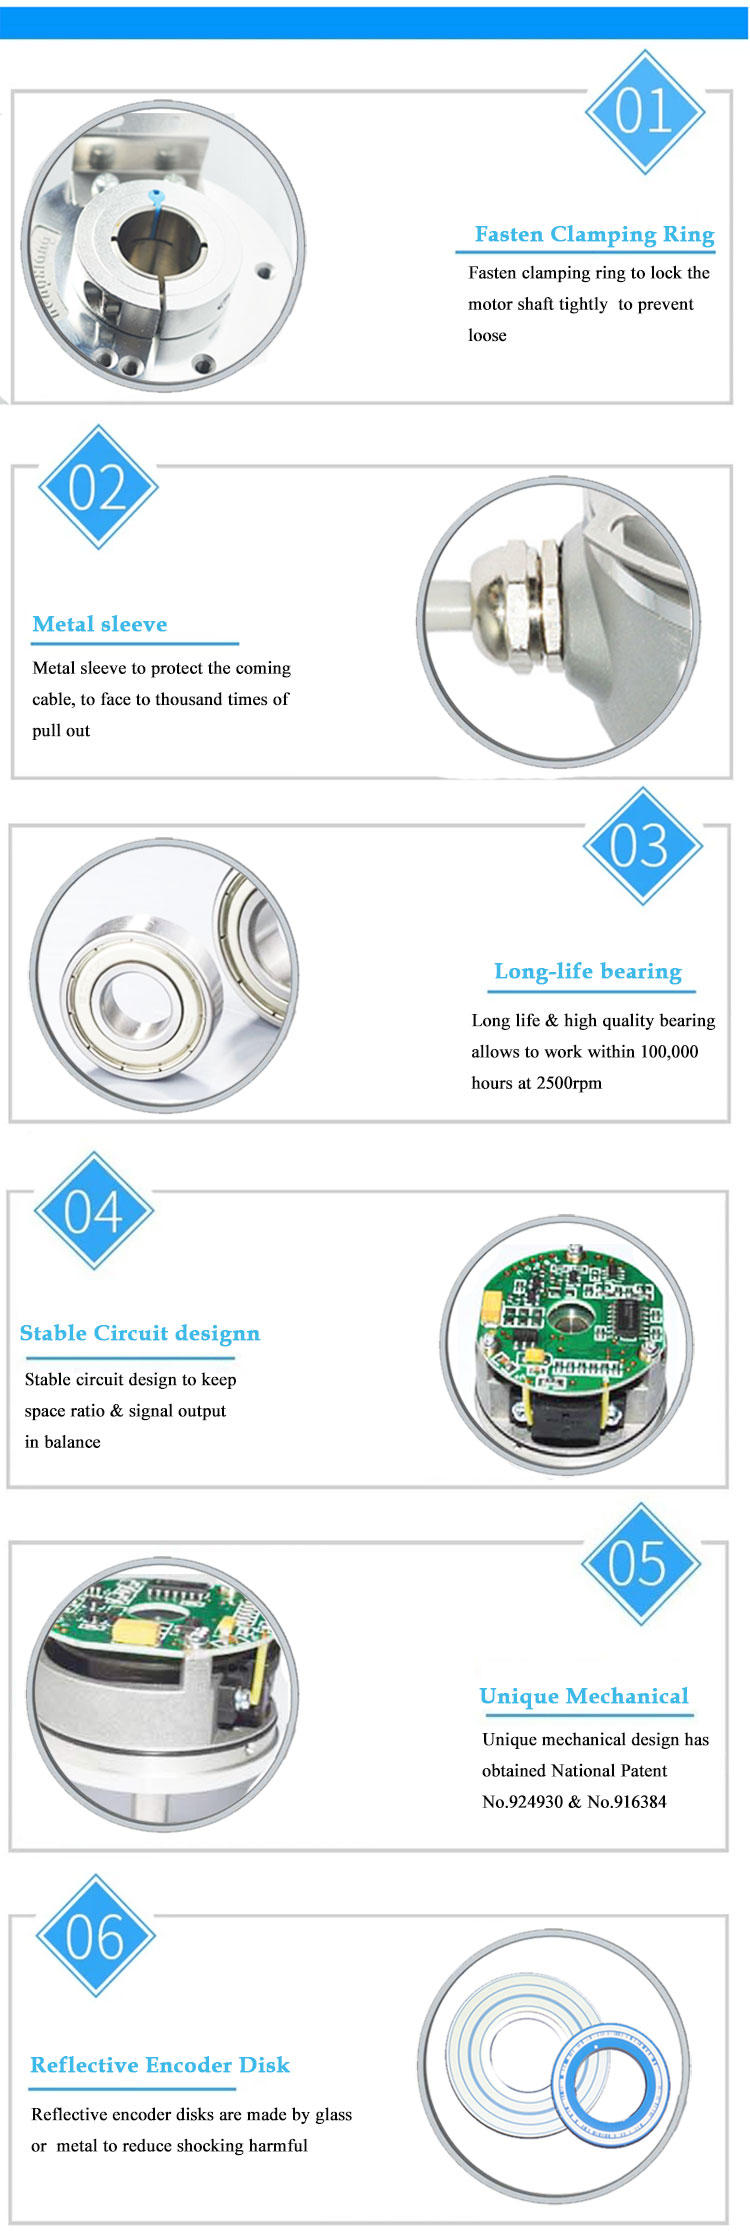 HENGXIANG optical encoder series for medical equipment-1